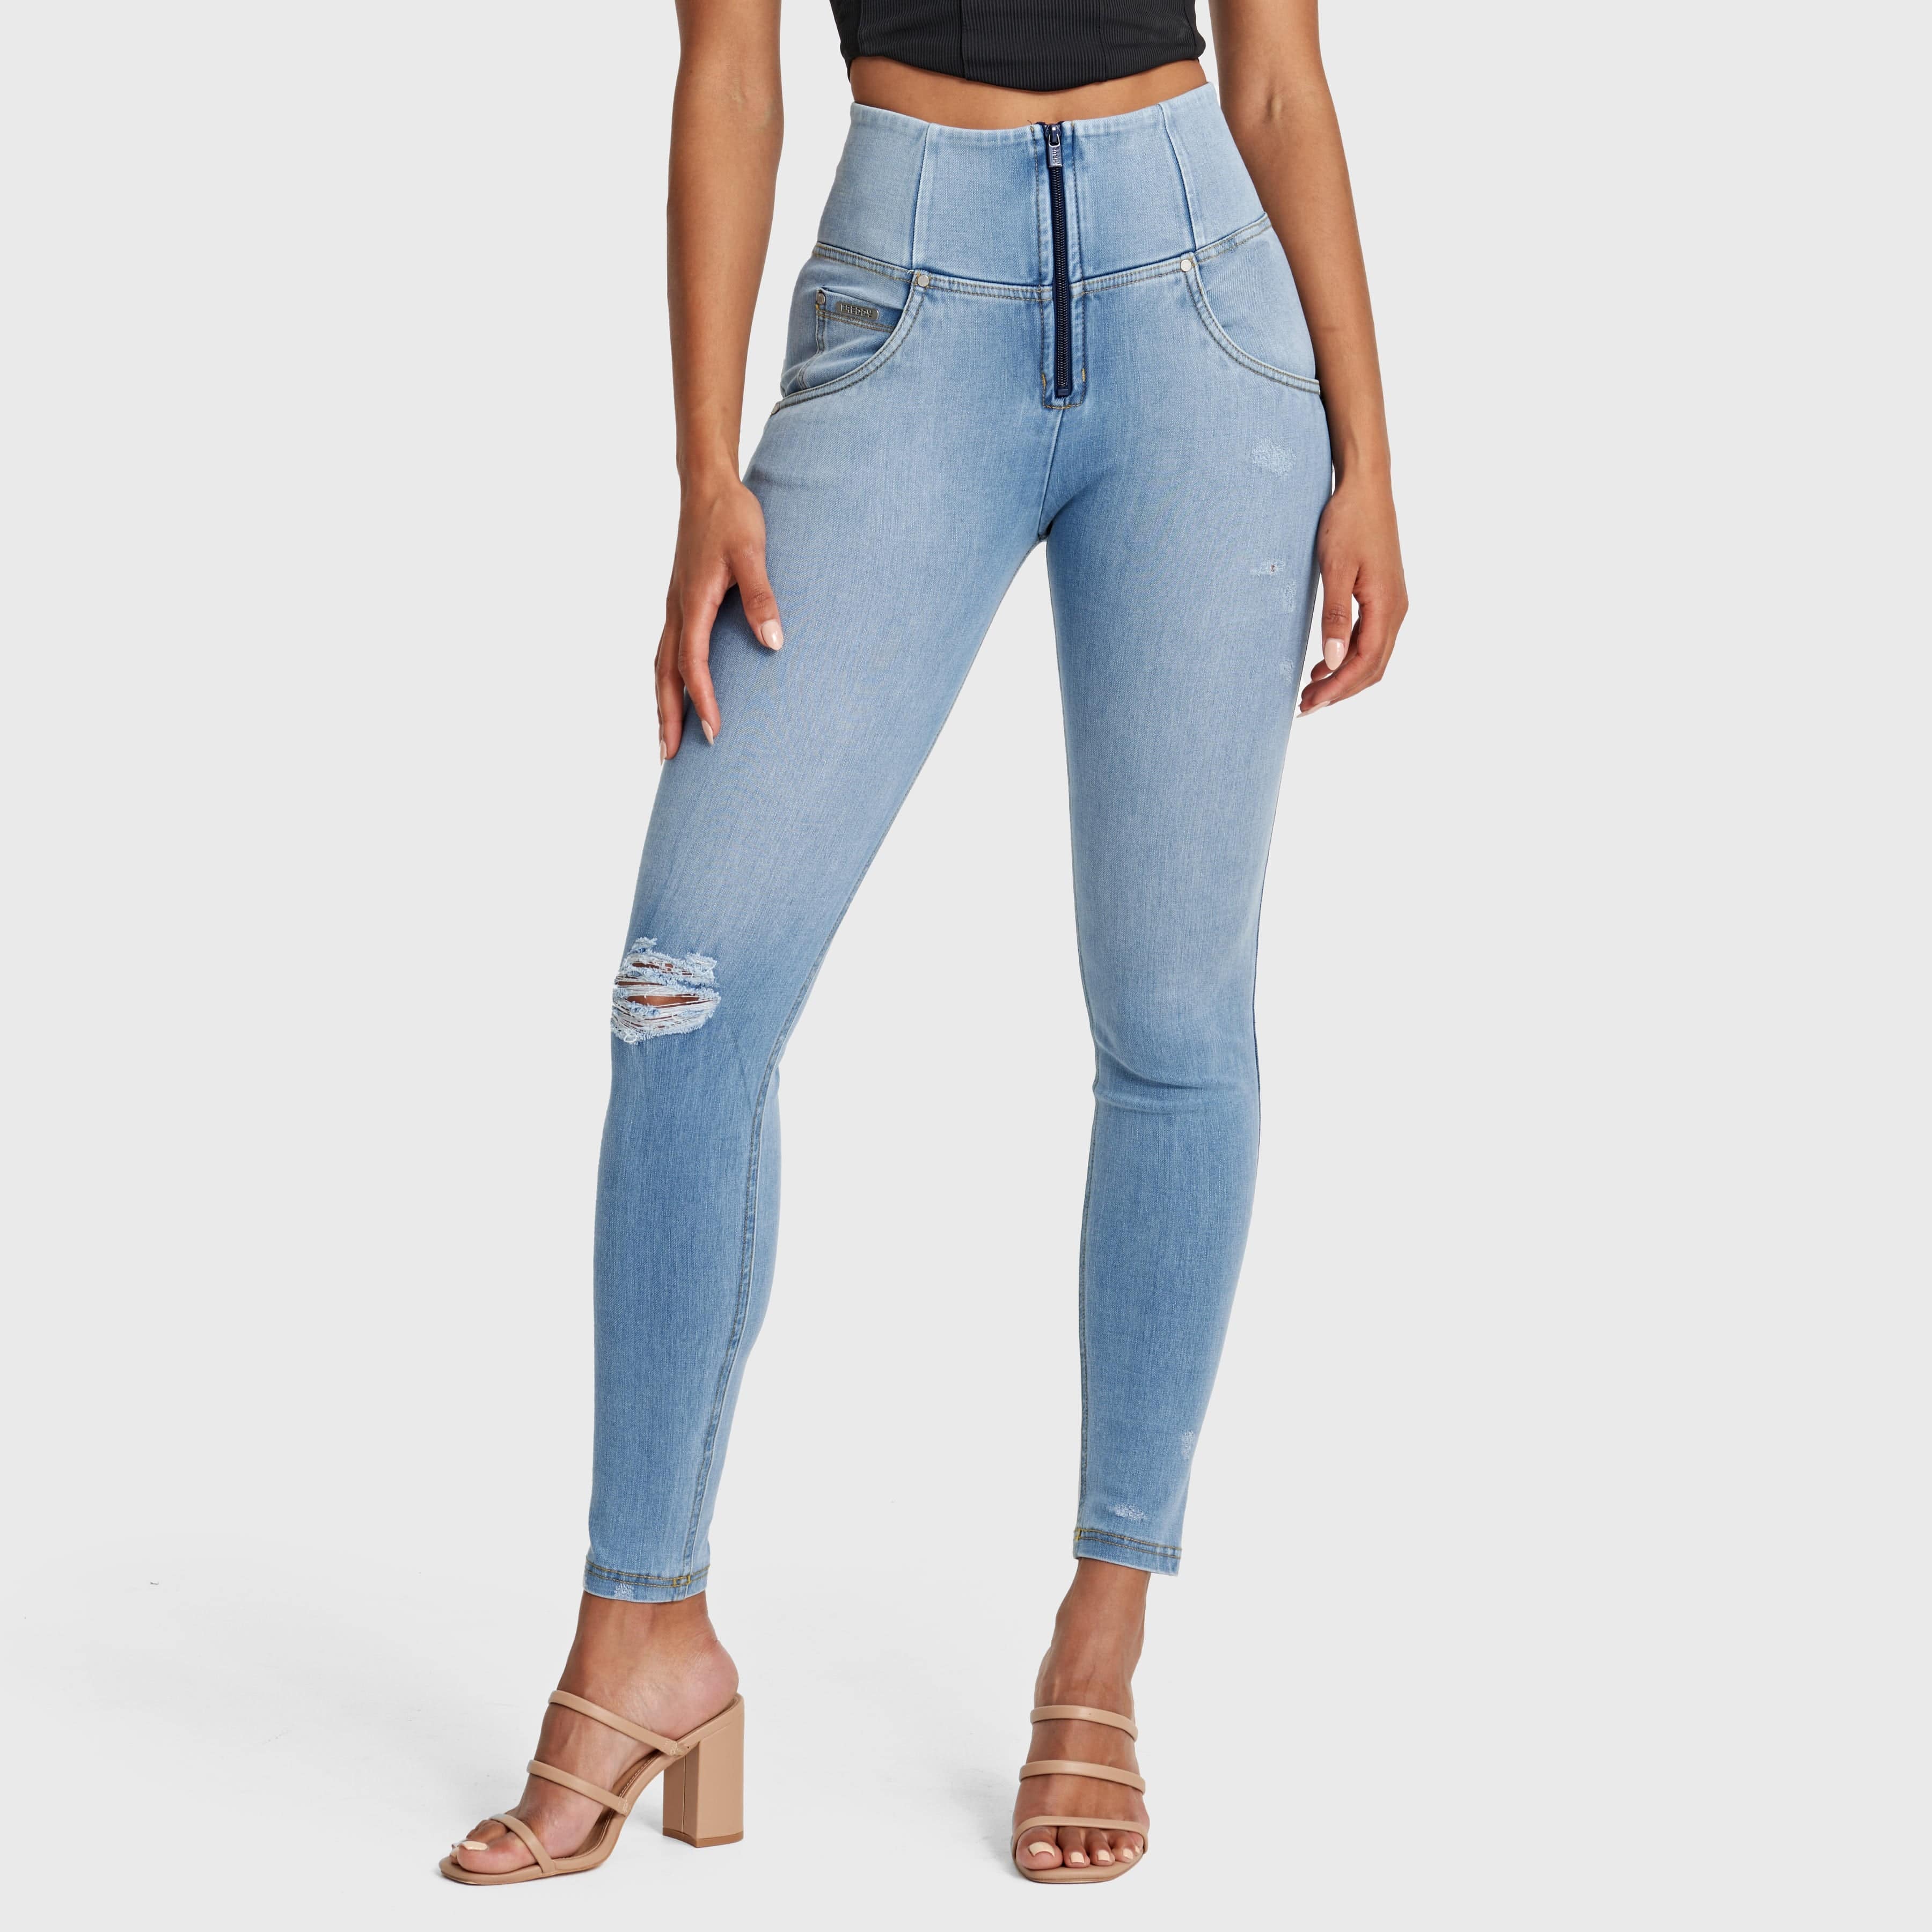 WR.UP® SNUG Distressed Jeans - High Waisted - Full Length - Light Blue + Yellow Stitching 2